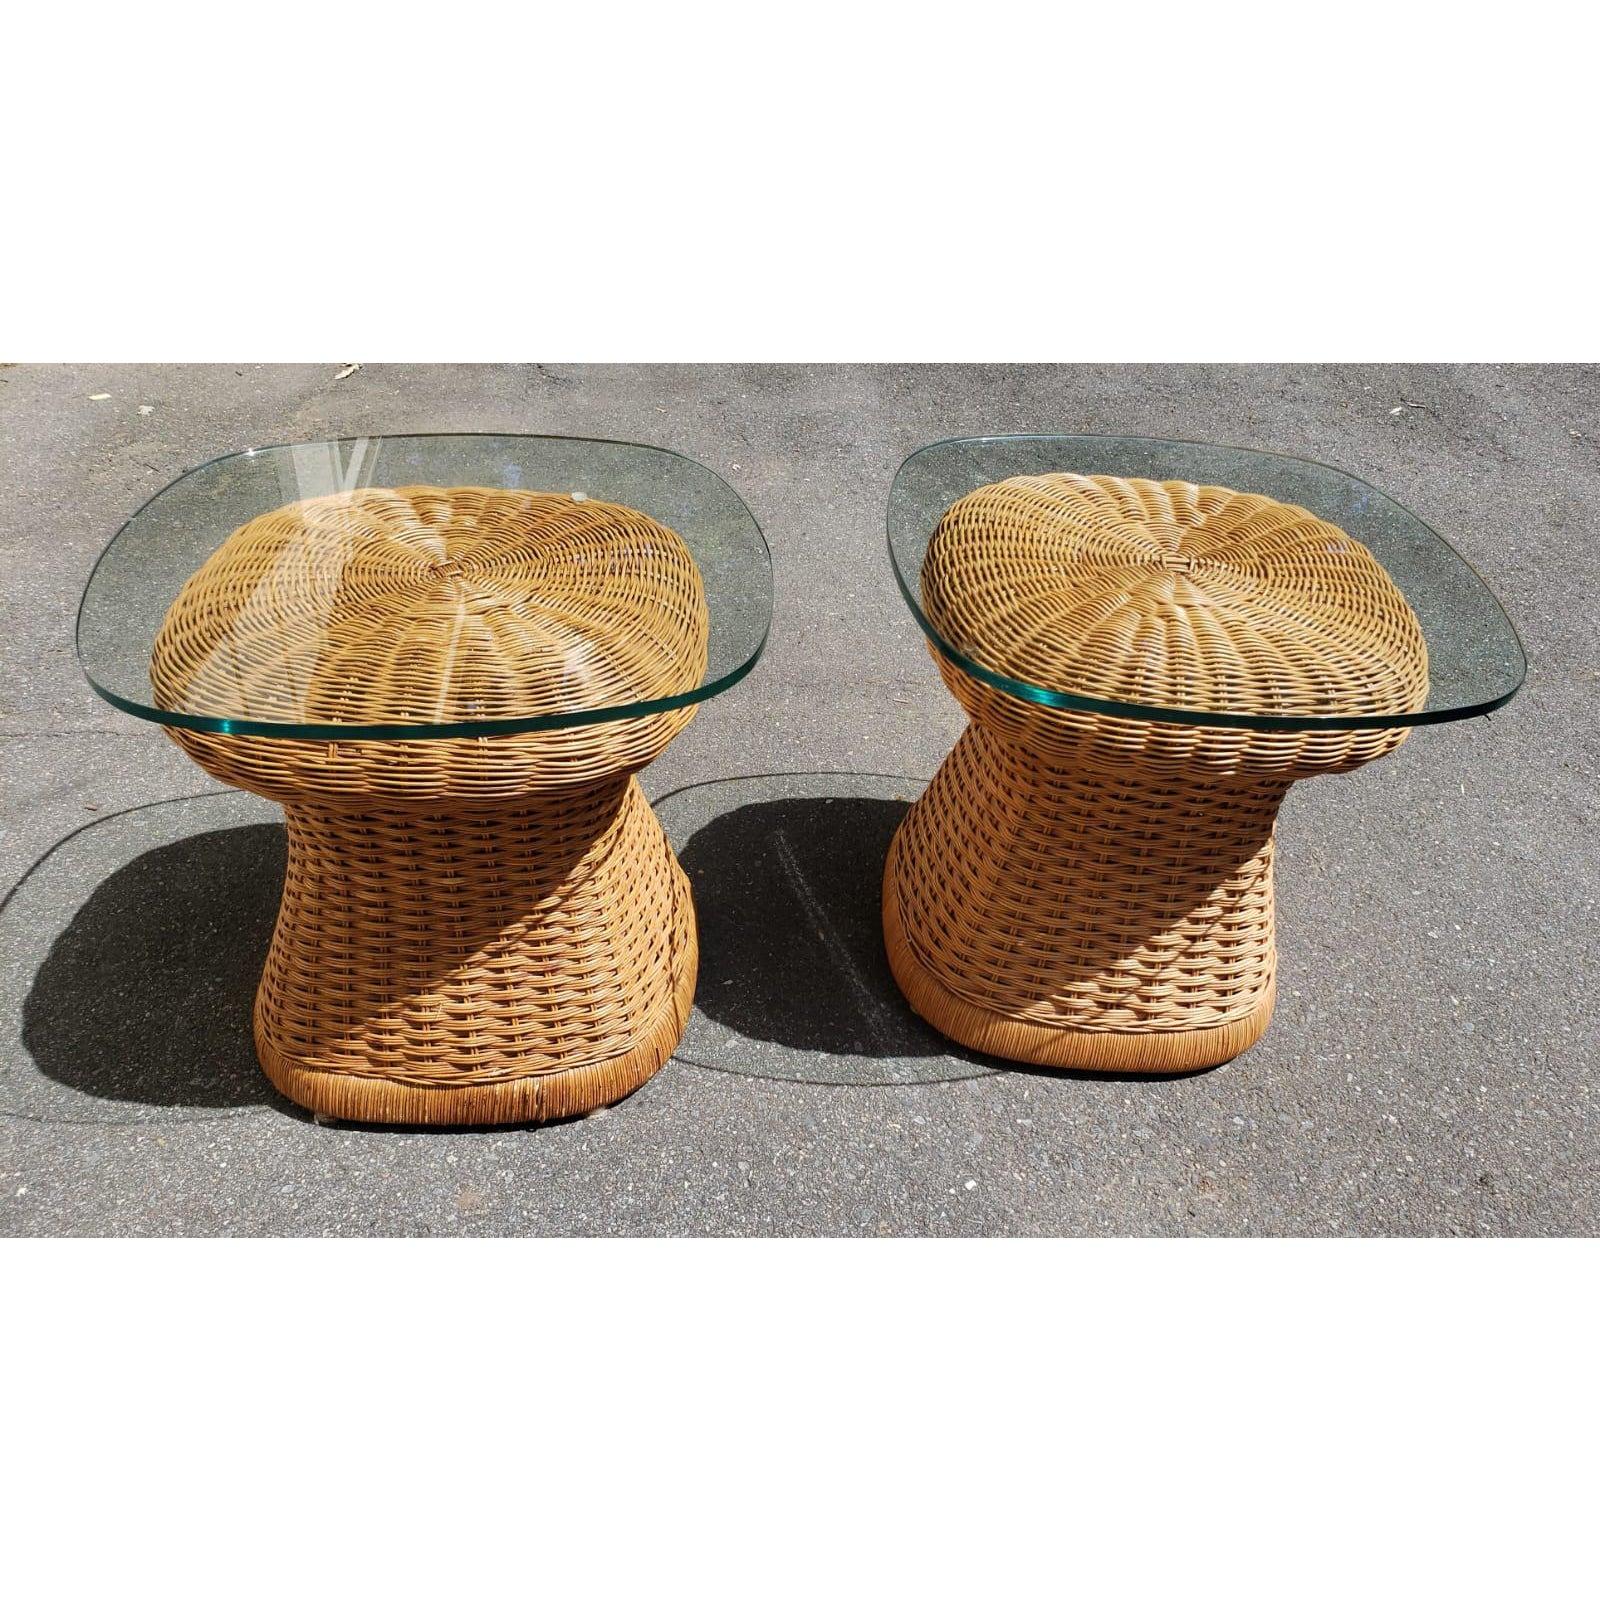 1960s Mid-Century Modern Wicker Side Tables With Tempered Glass Tops, a Pair For Sale 3